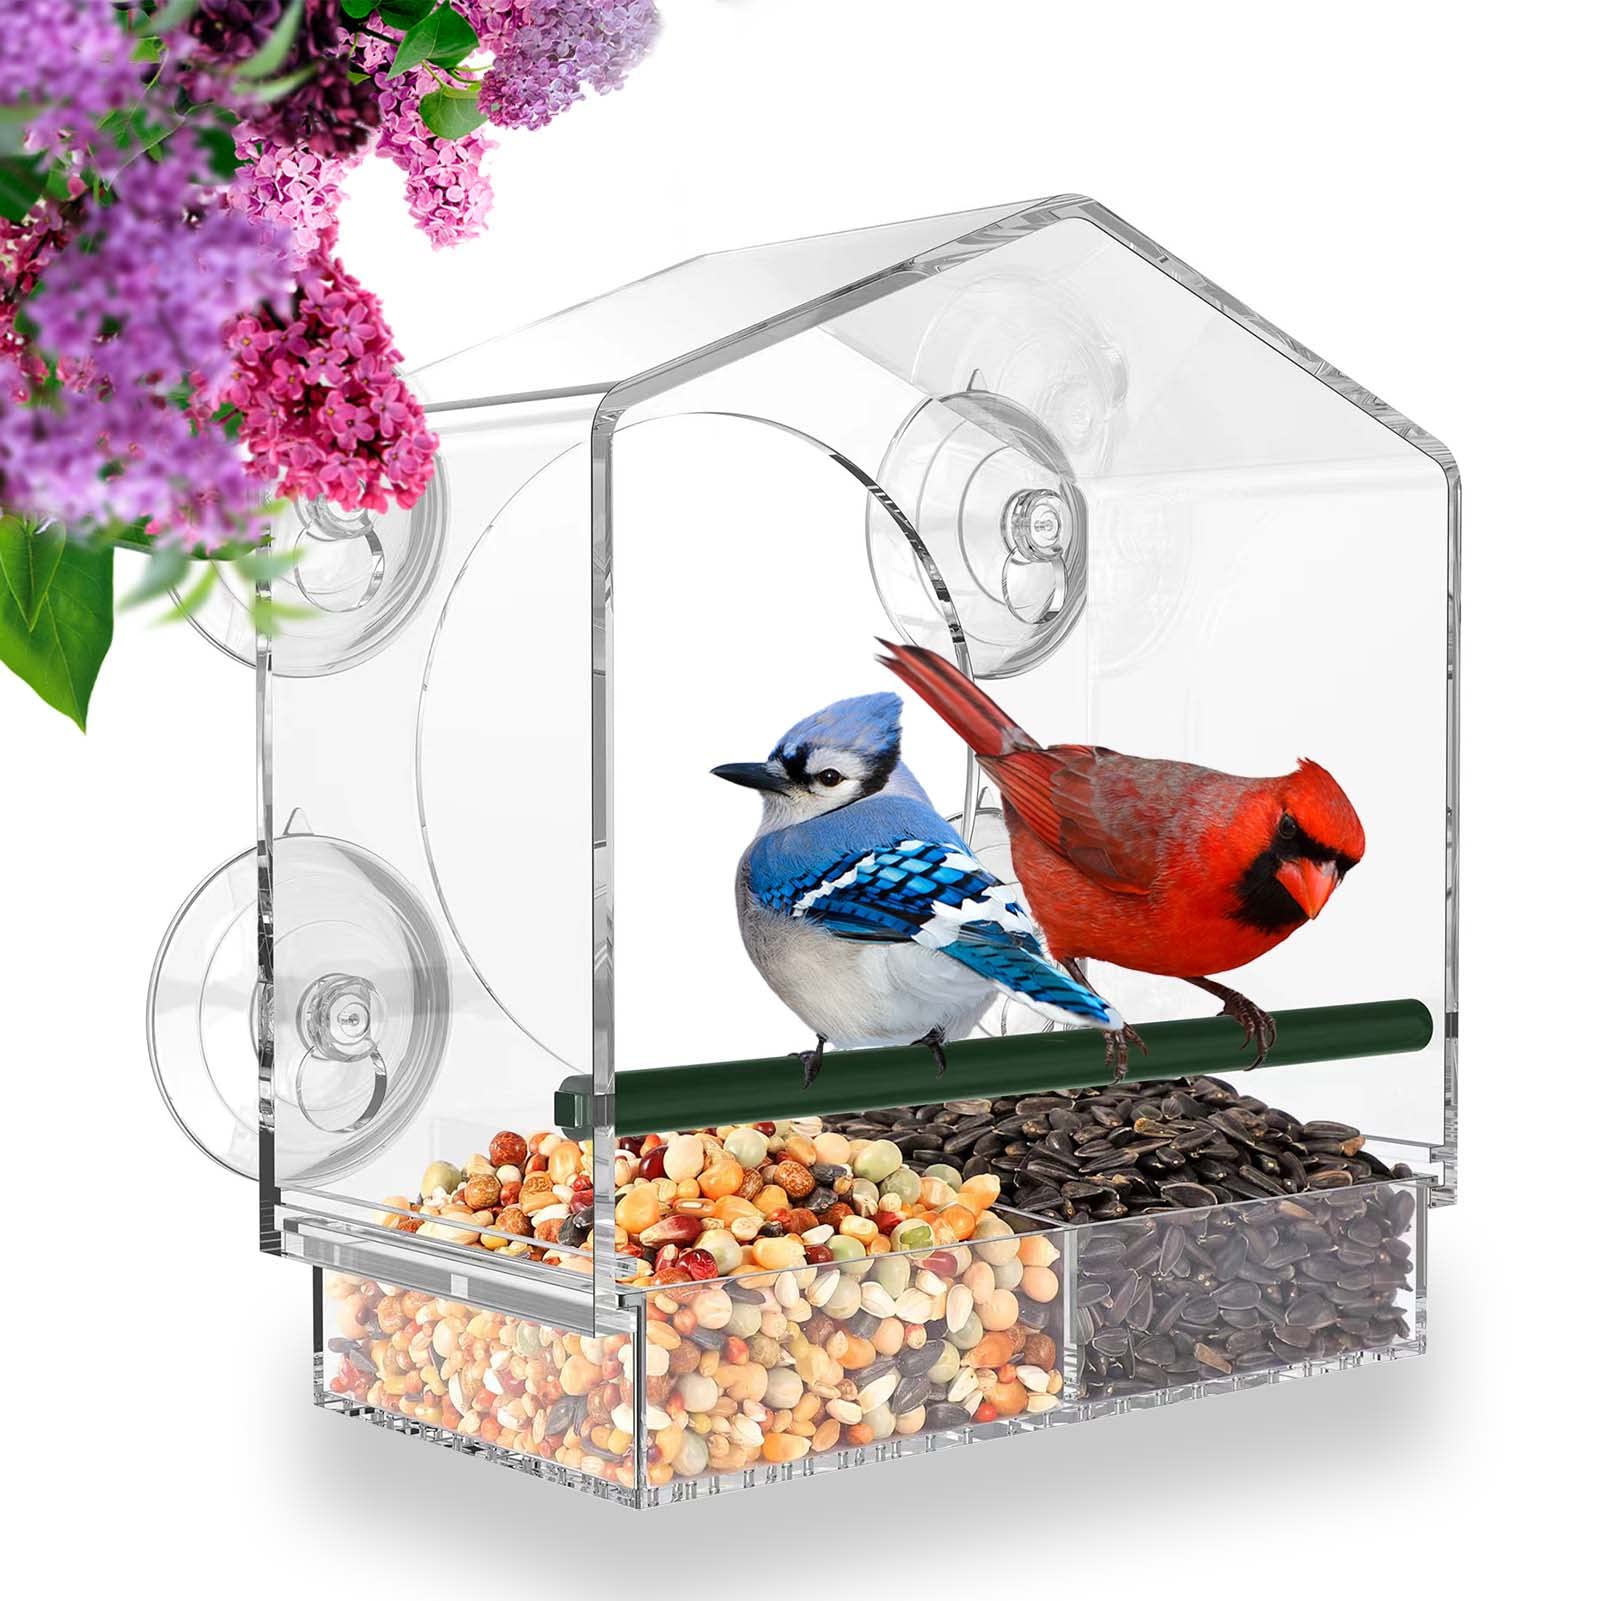 Hot sale--Window Bird Feeder for Outside🔥BUY 2 FREE SHIPPING🔥